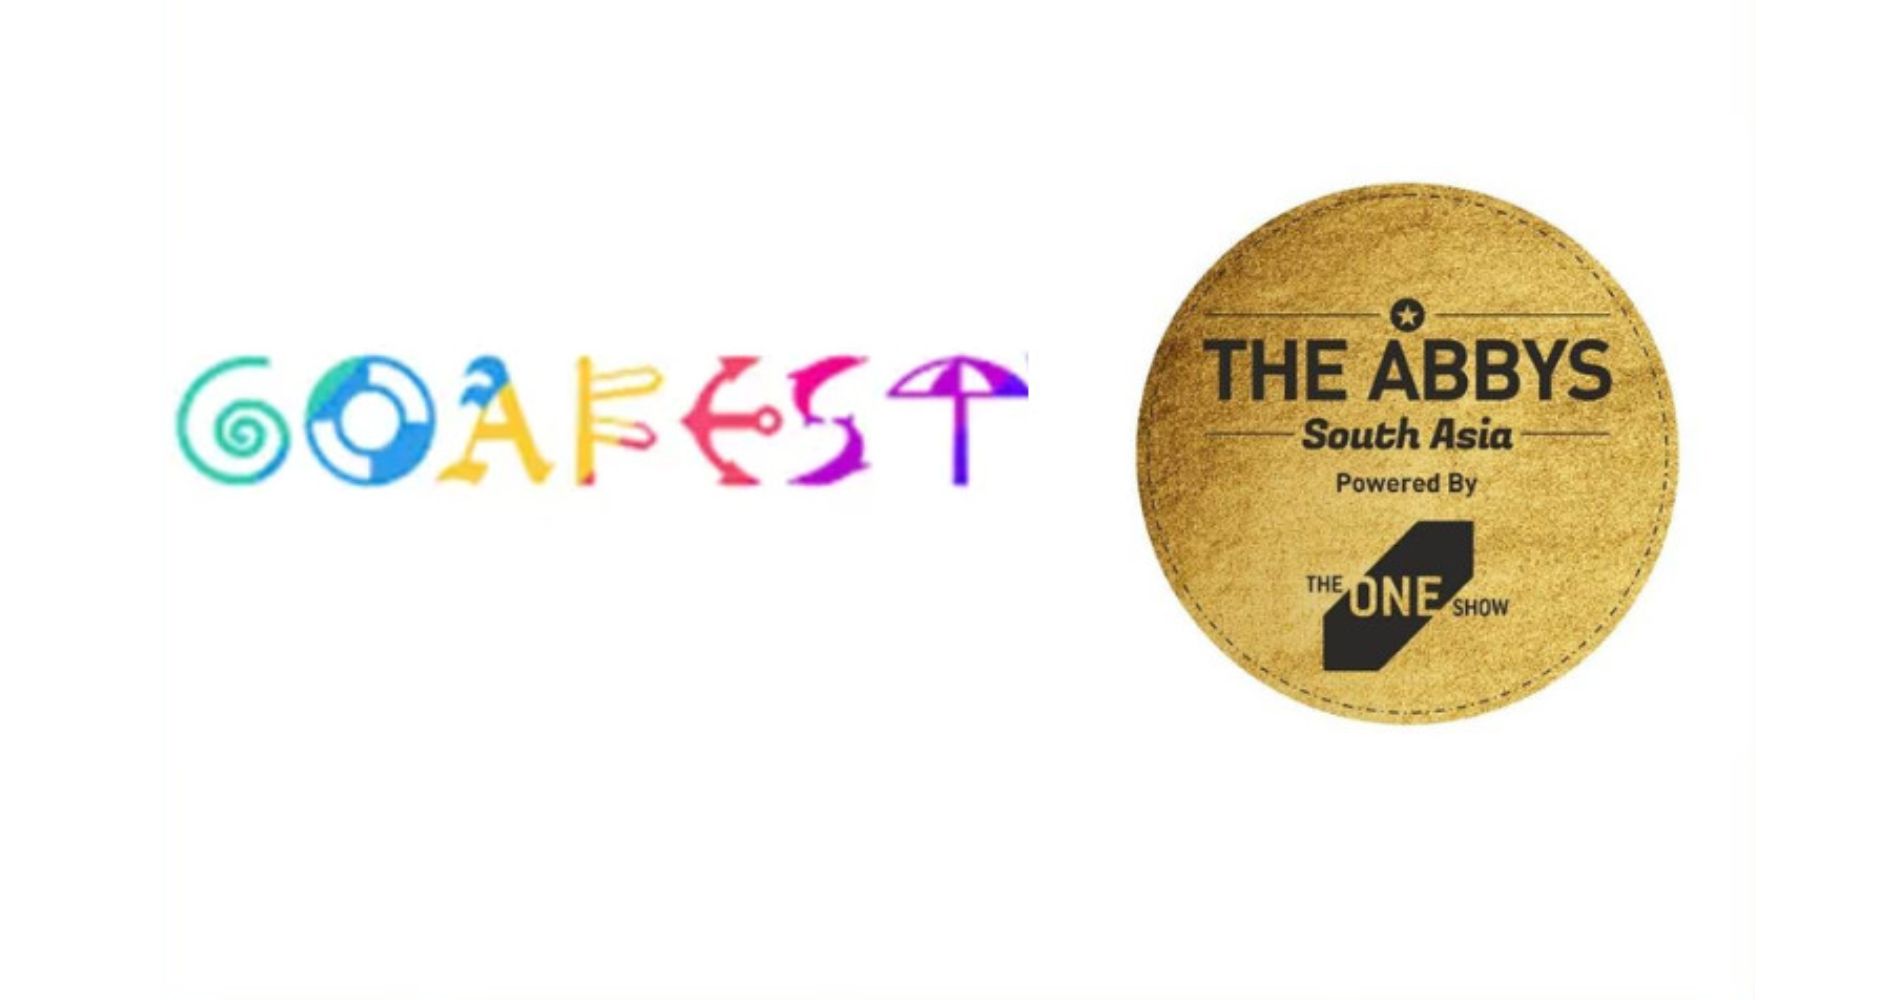 Save The Date: Goafest 2024 And ABBY Awards Return To Mumbai From 29-31st May 2024